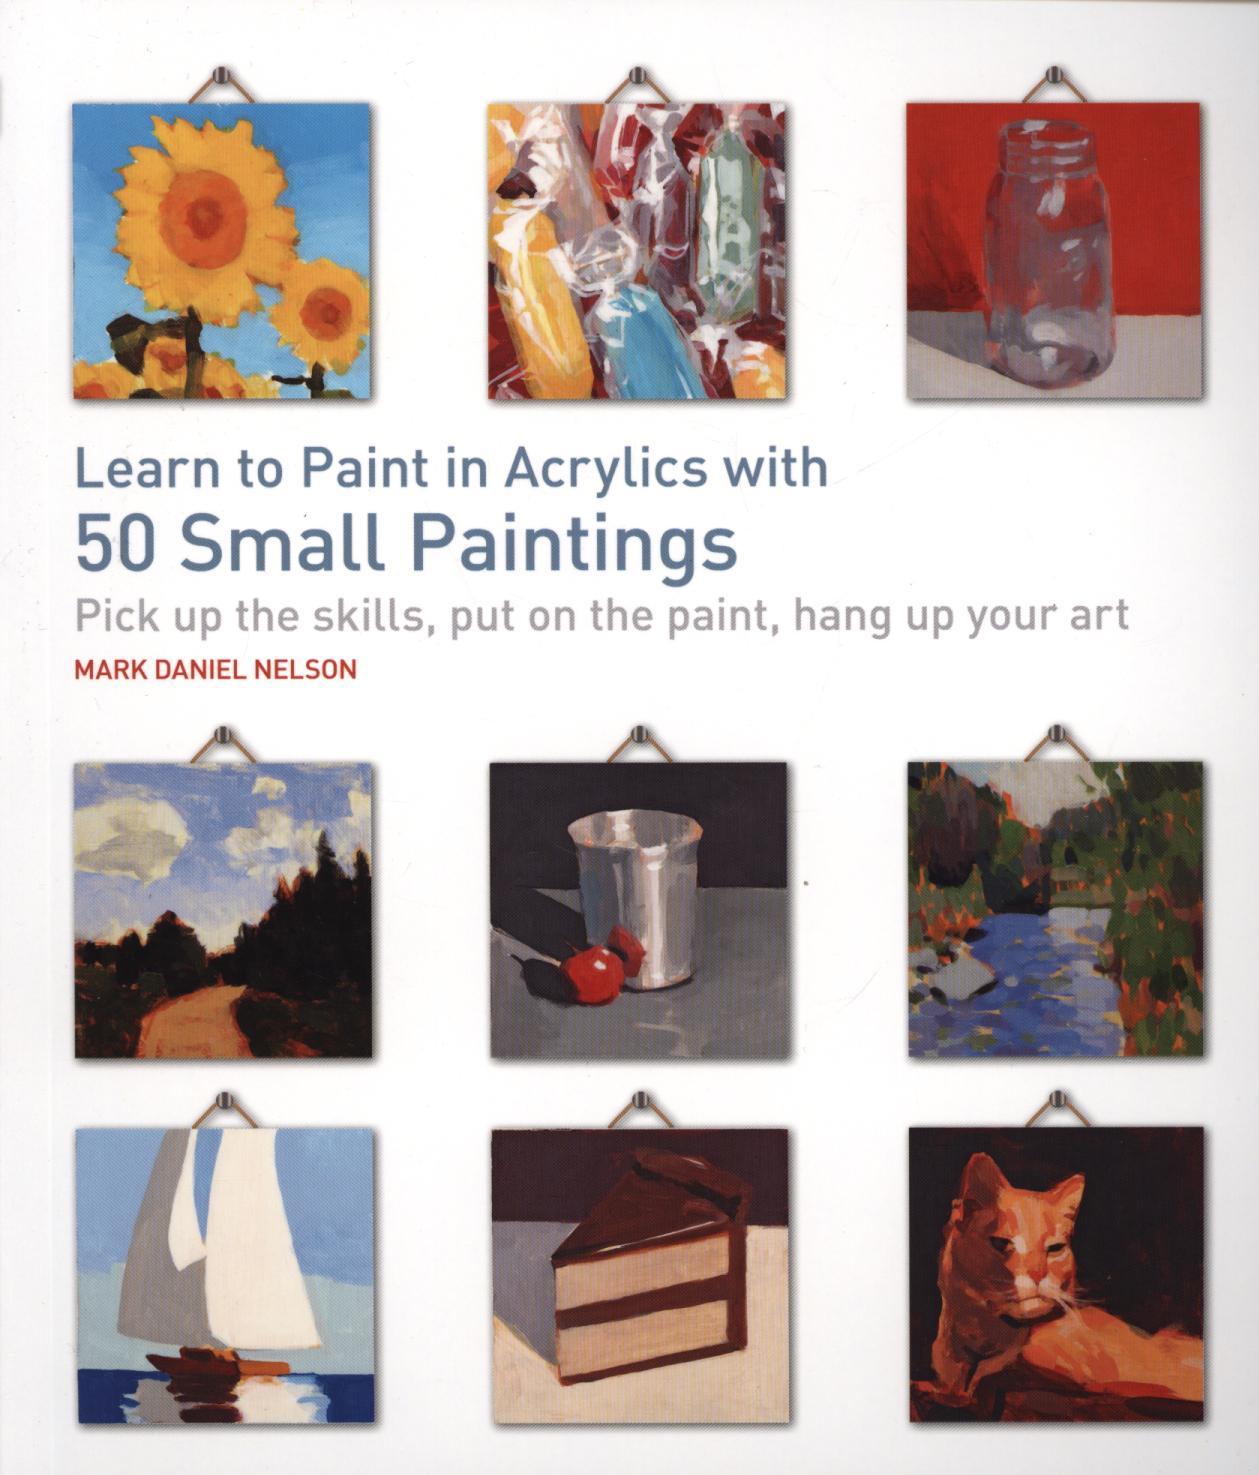 Learn to Paint in Acrylics with 50 Small Paintings - Mark Daniel Nelson